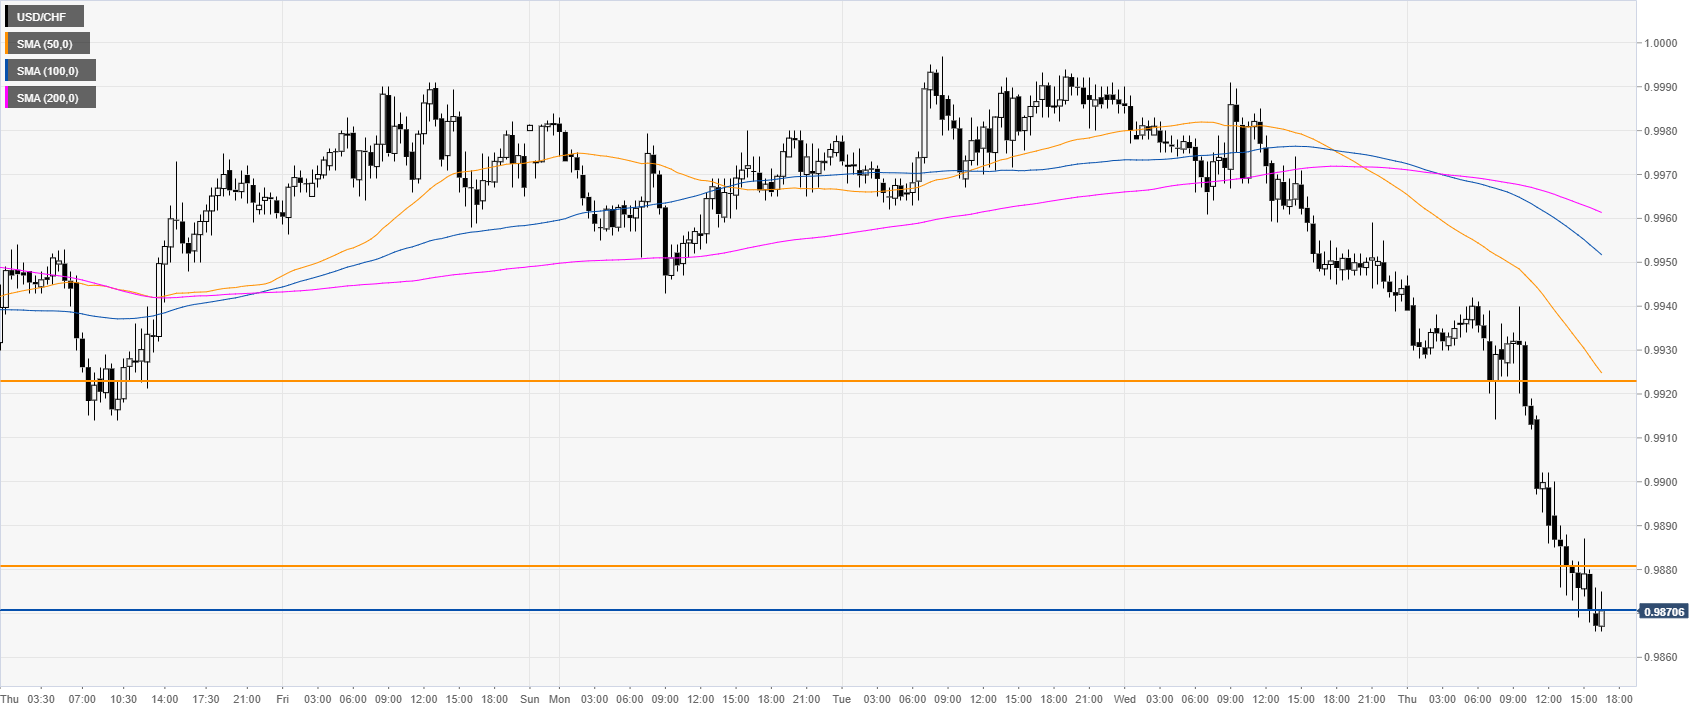 USD/CHF technical analysis: Greenback hits fresh October lows against the Swiss Franc